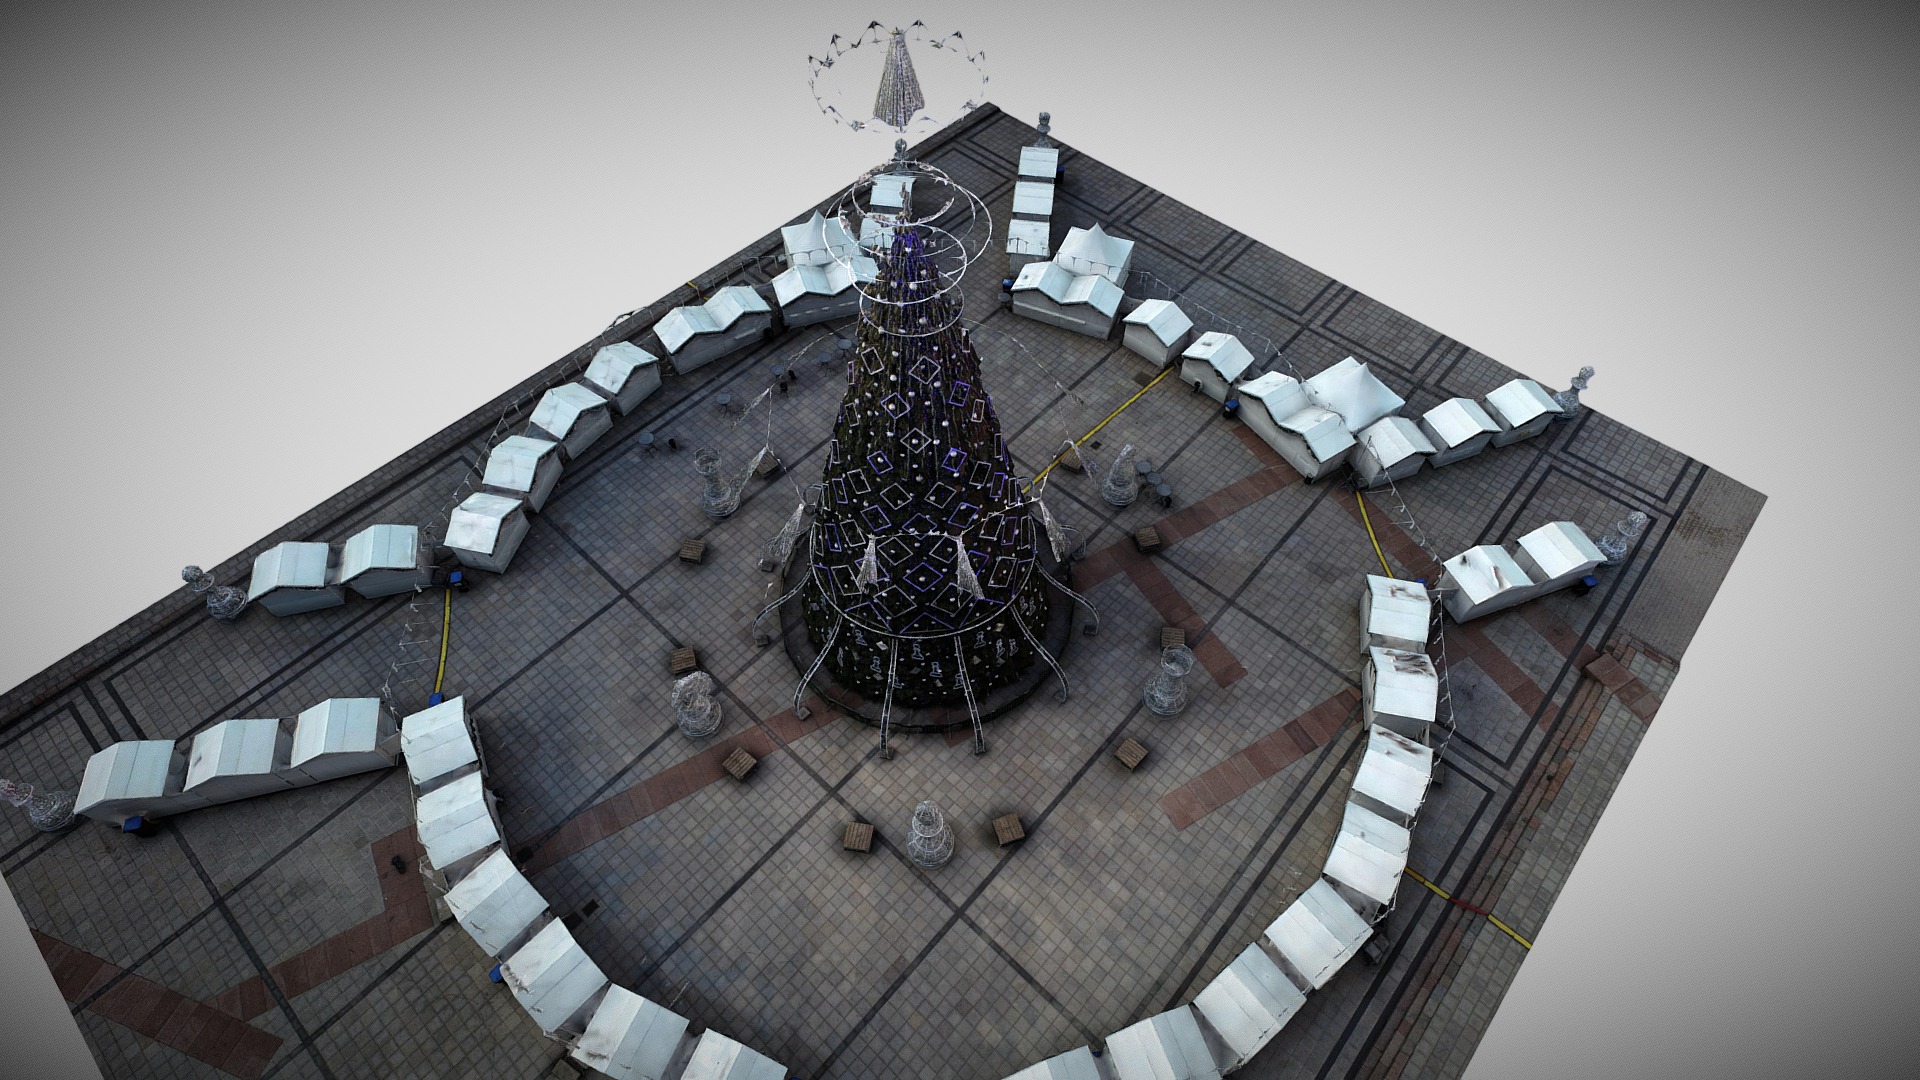 3D model Vilnius Christmas tree 2019 - This is a 3D model of the Vilnius Christmas tree 2019. The 3D model is about a large piece of equipment.